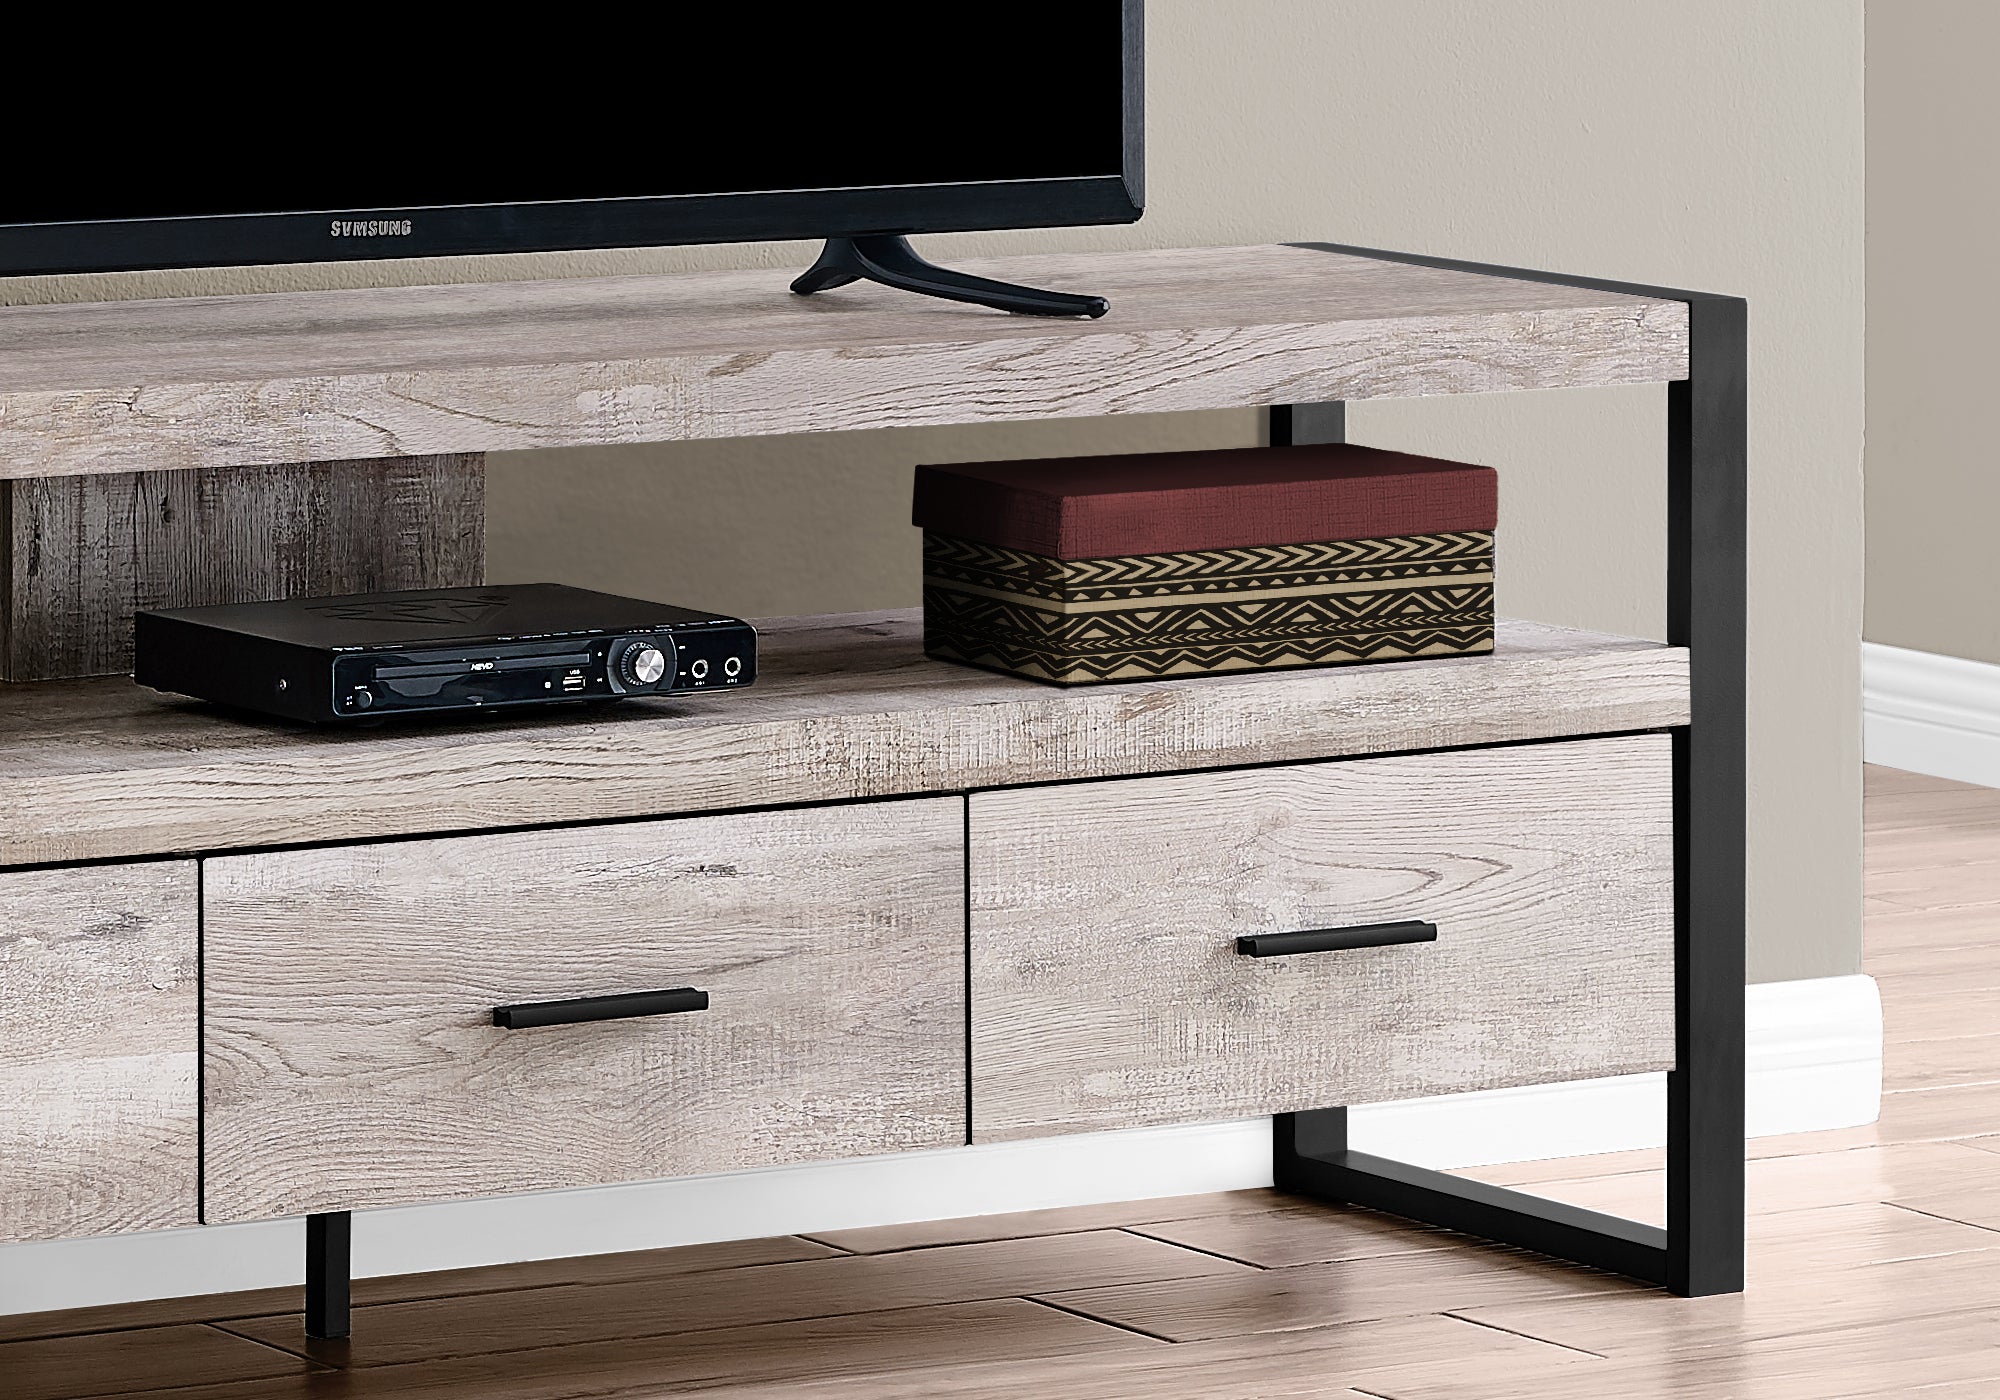 I 2822 - TV STAND - 60"L / TAUPE RECLAIMED WOOD-LOOK / 3 DRAWERS BY MONARCH SPECIALTIES INC